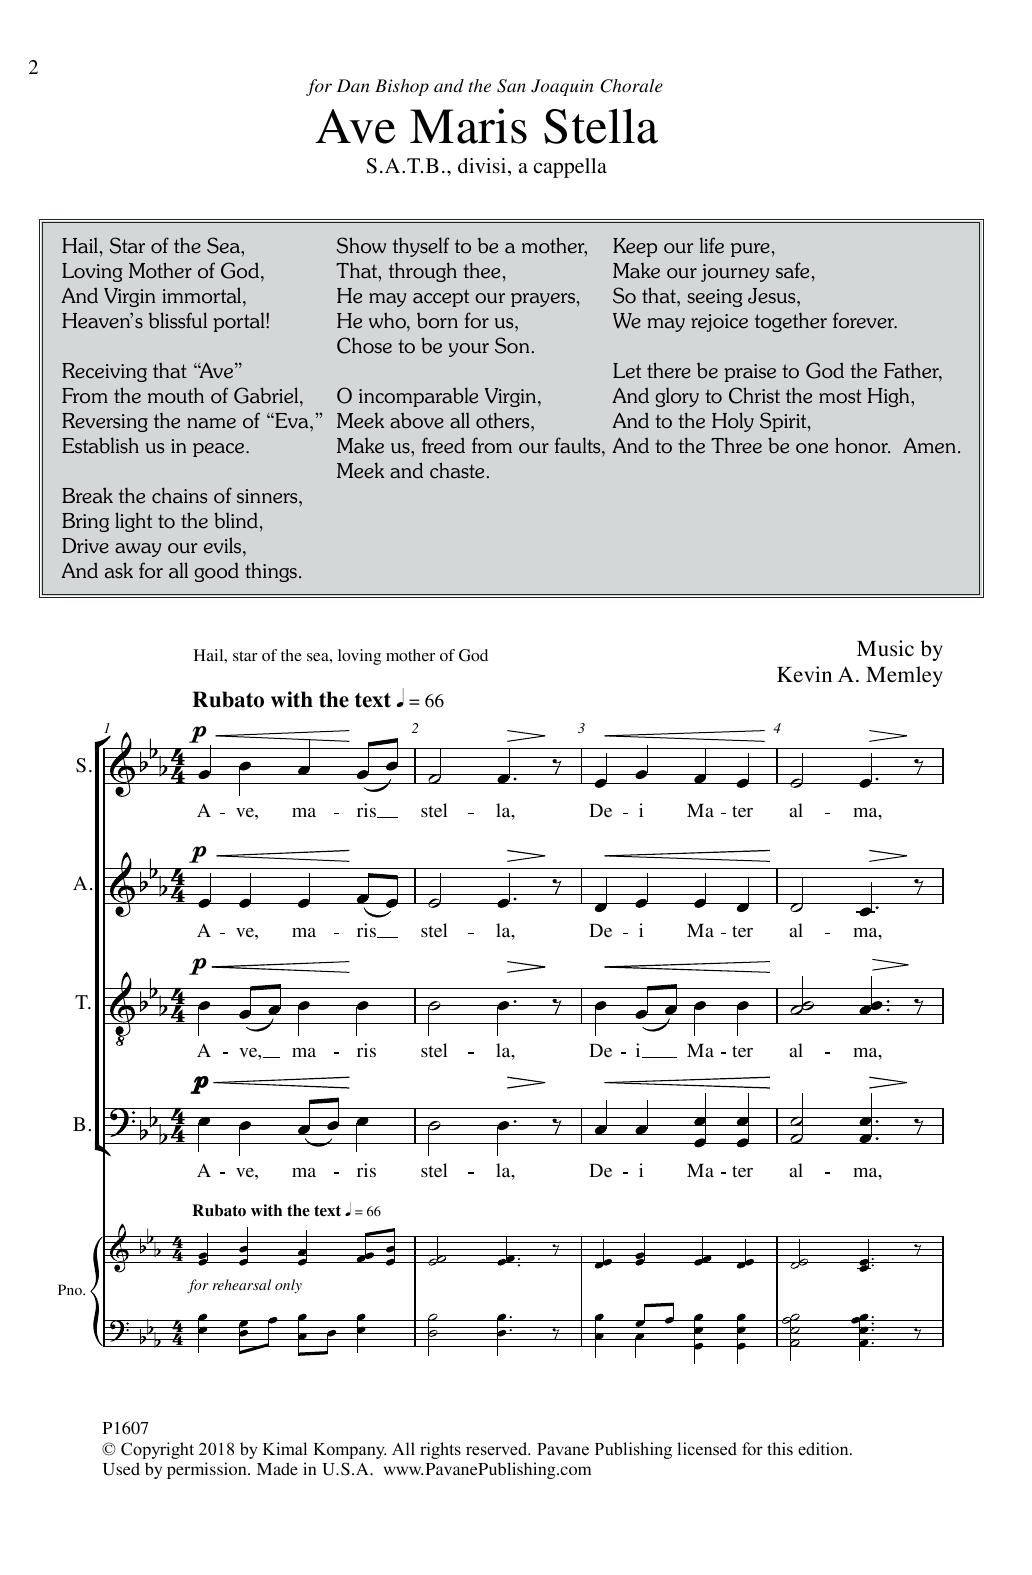 Download Kevin A. Memley Ave Maris Stella Sheet Music